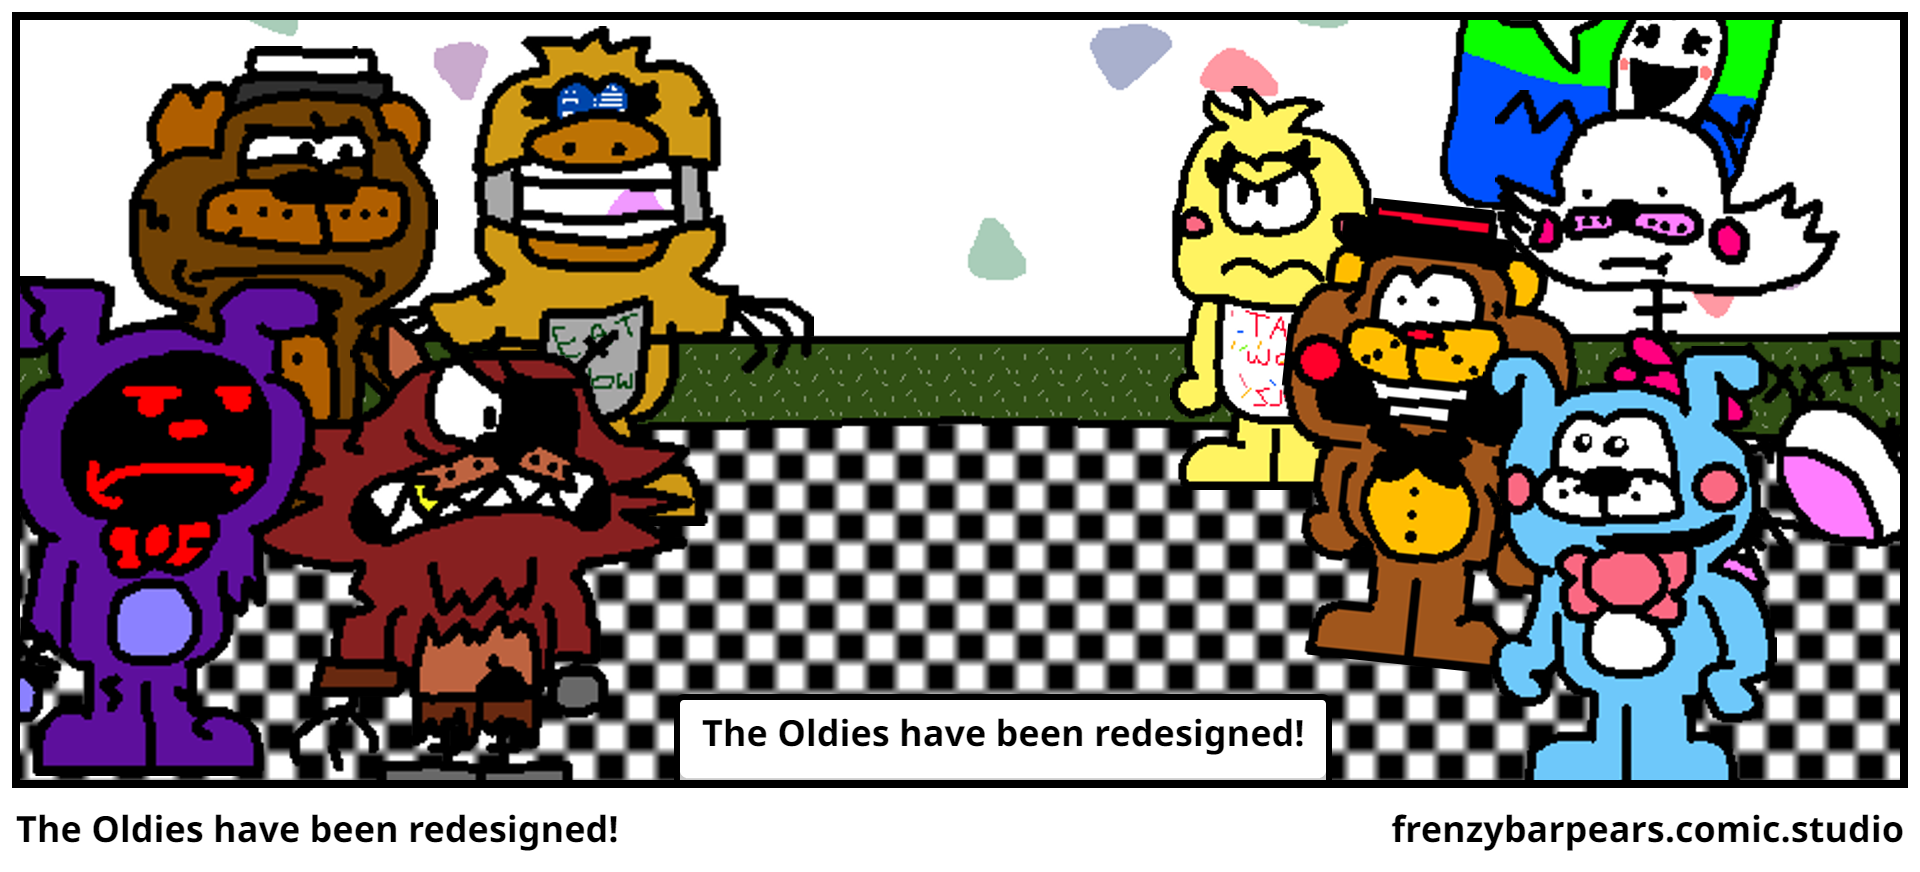 The Oldies have been redesigned!